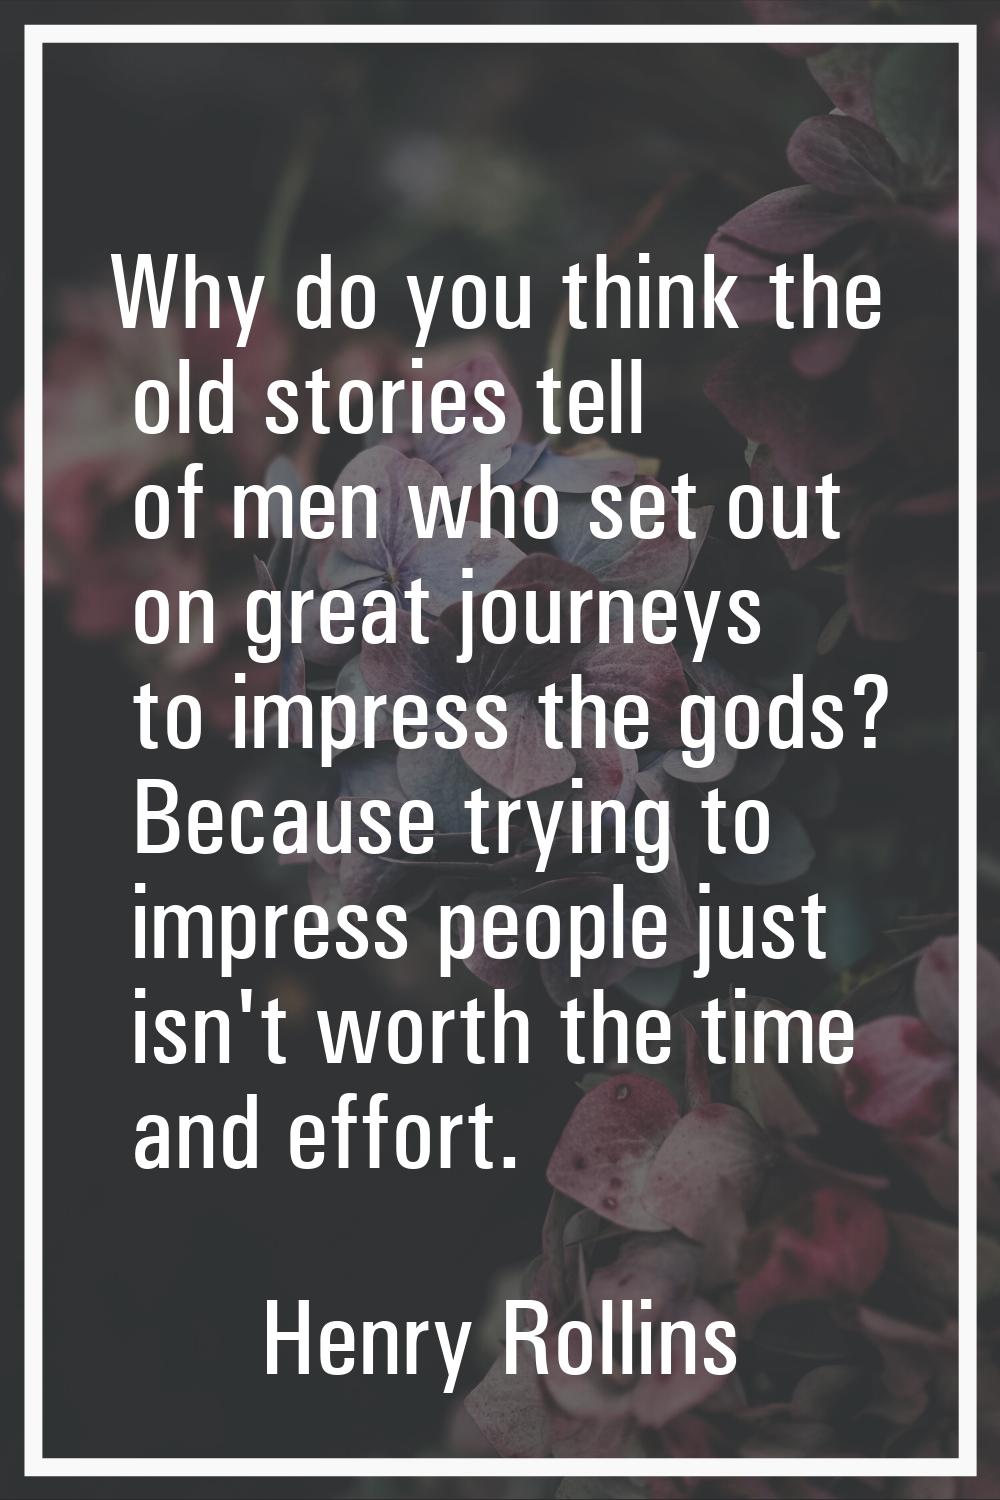 Why do you think the old stories tell of men who set out on great journeys to impress the gods? Bec